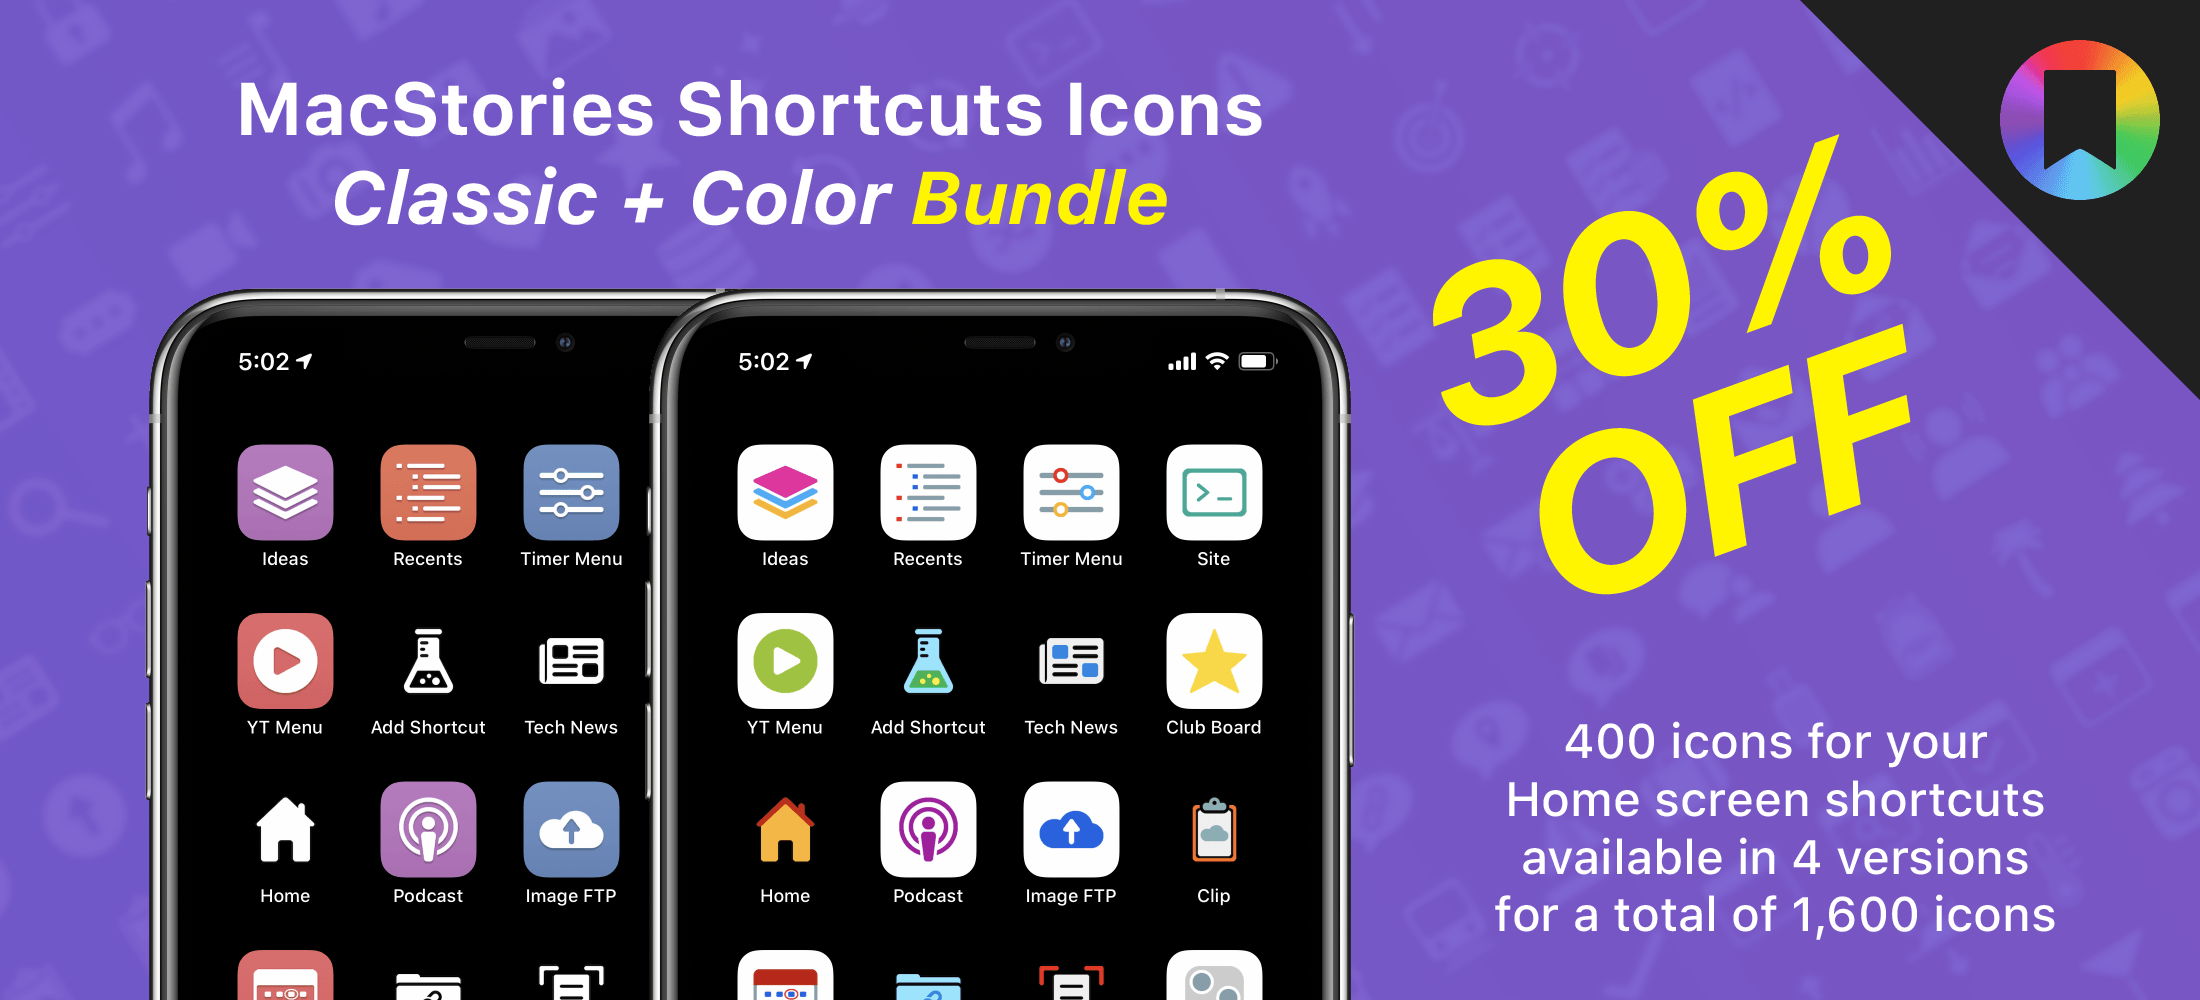 The Shortcuts Icons Bundle edition is available at 30% off.